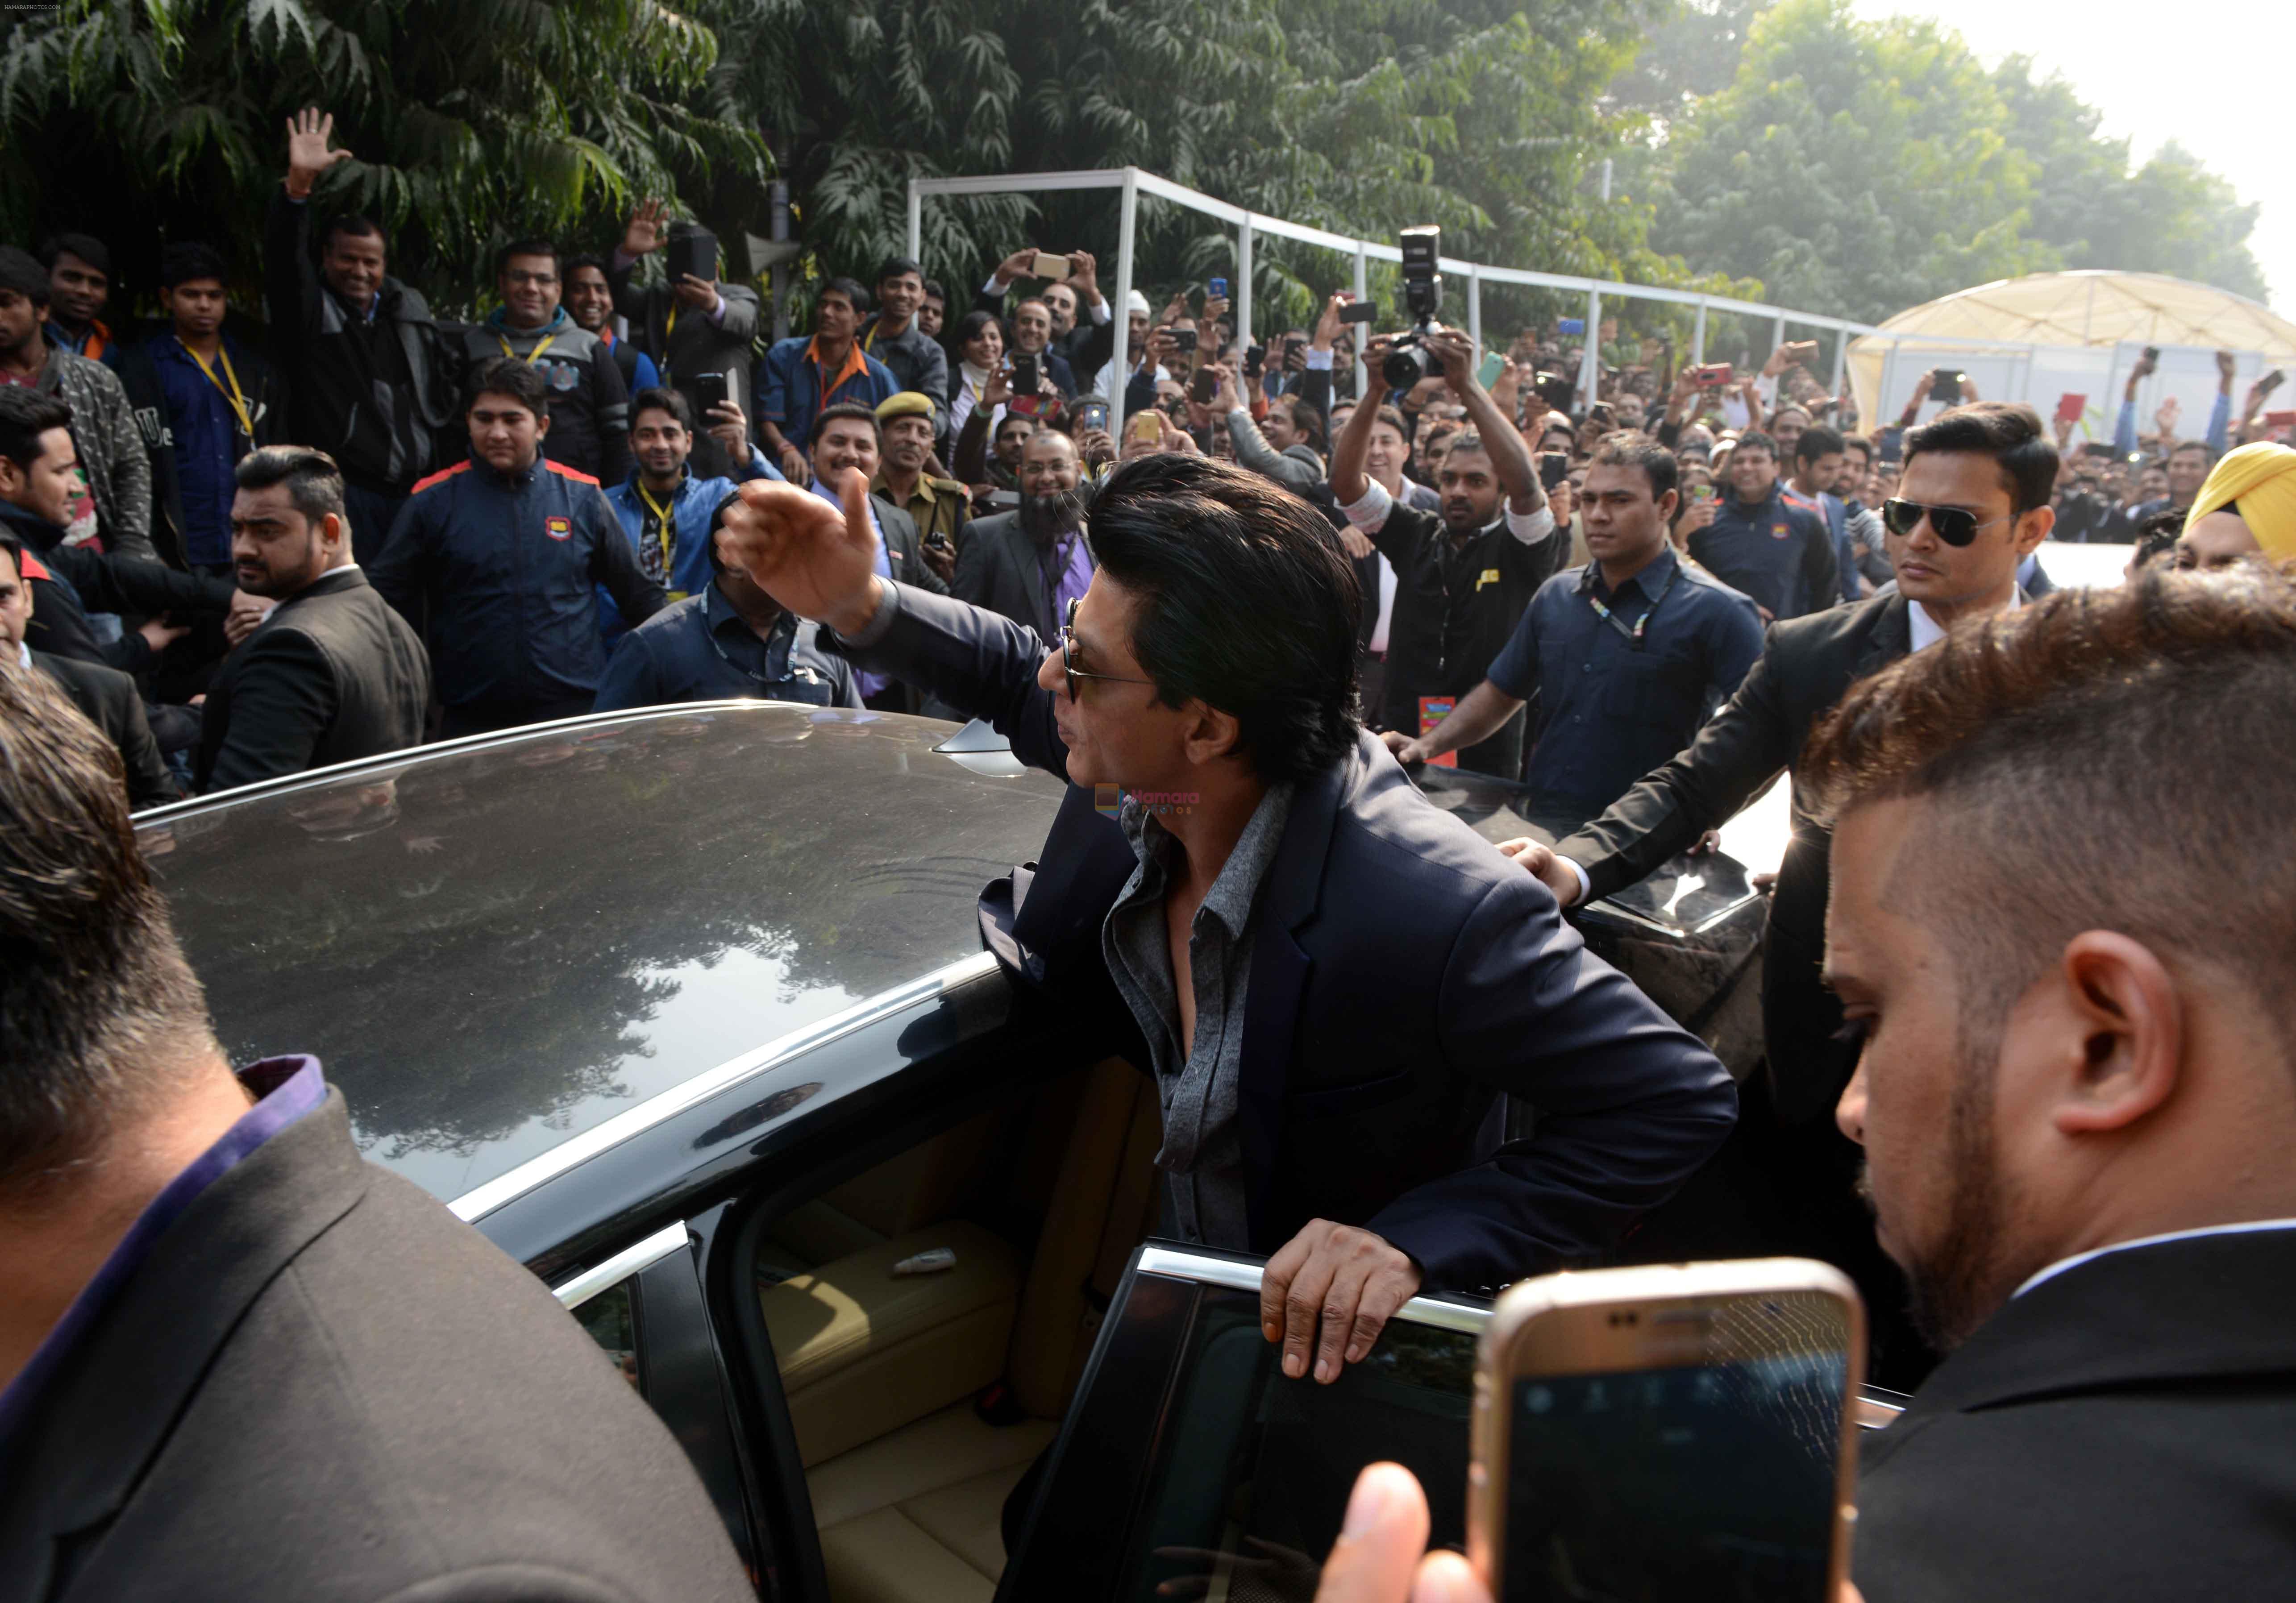 Shahrukh Khan during the Unveil of Exhibition of Asia's Largest Building Materials architecture and design Exhibitiona at Pragati Maidan in New Delhi on 17th Dec 2015